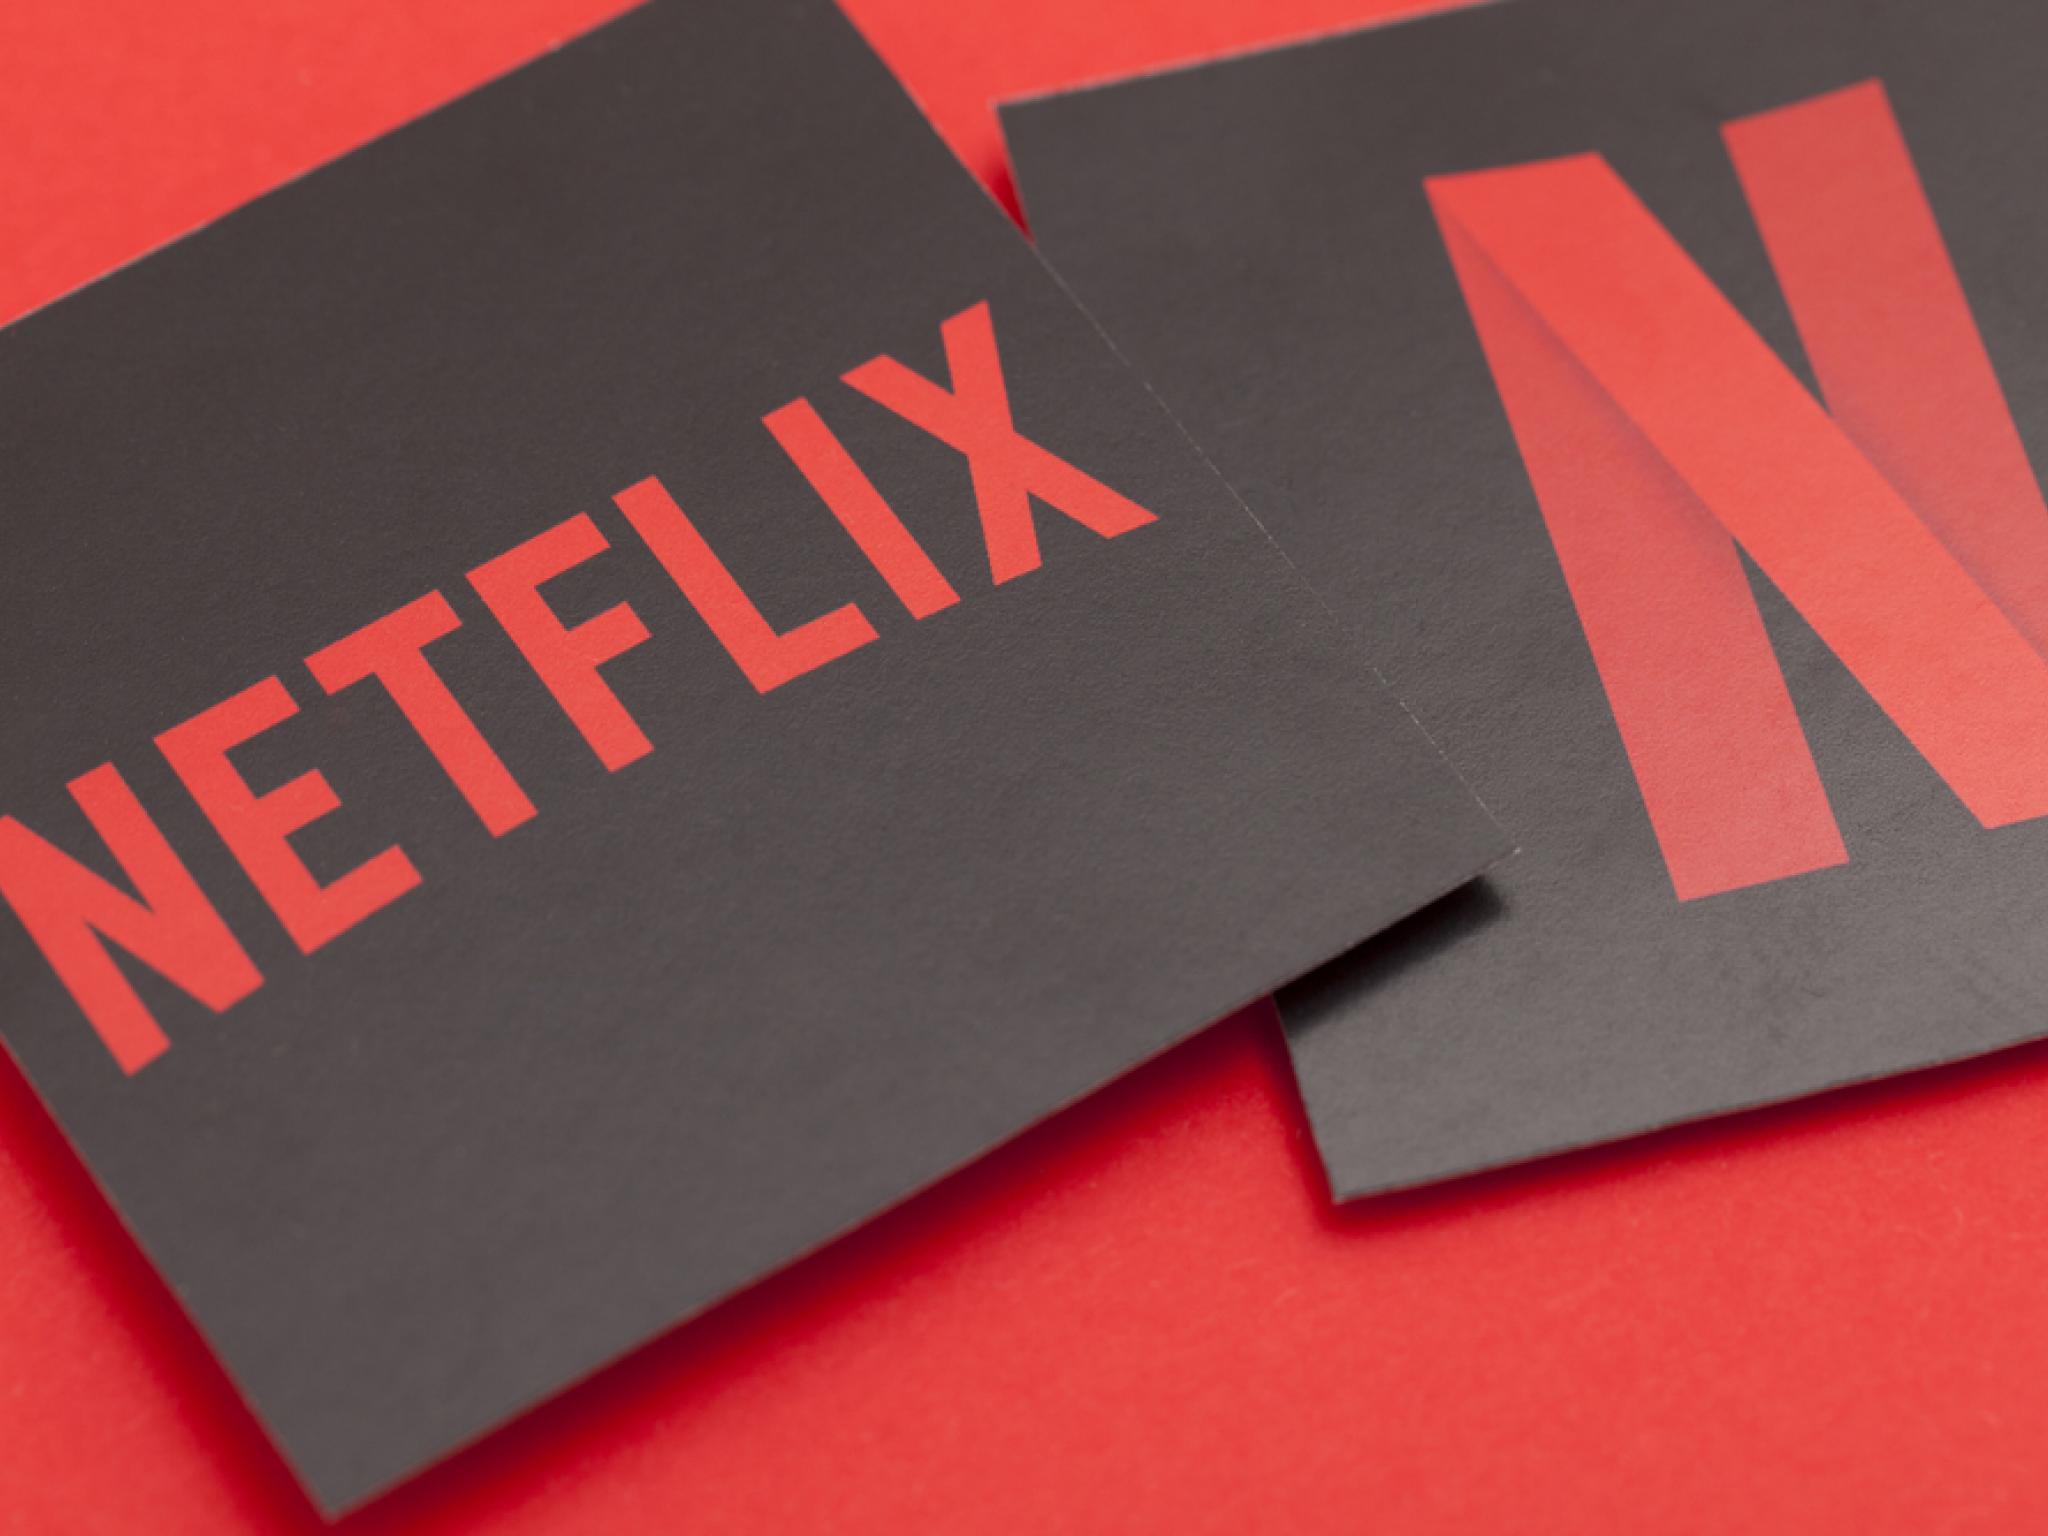  netflix-revamps-film-division-with-genre-specific-focus-under-new-leadership 